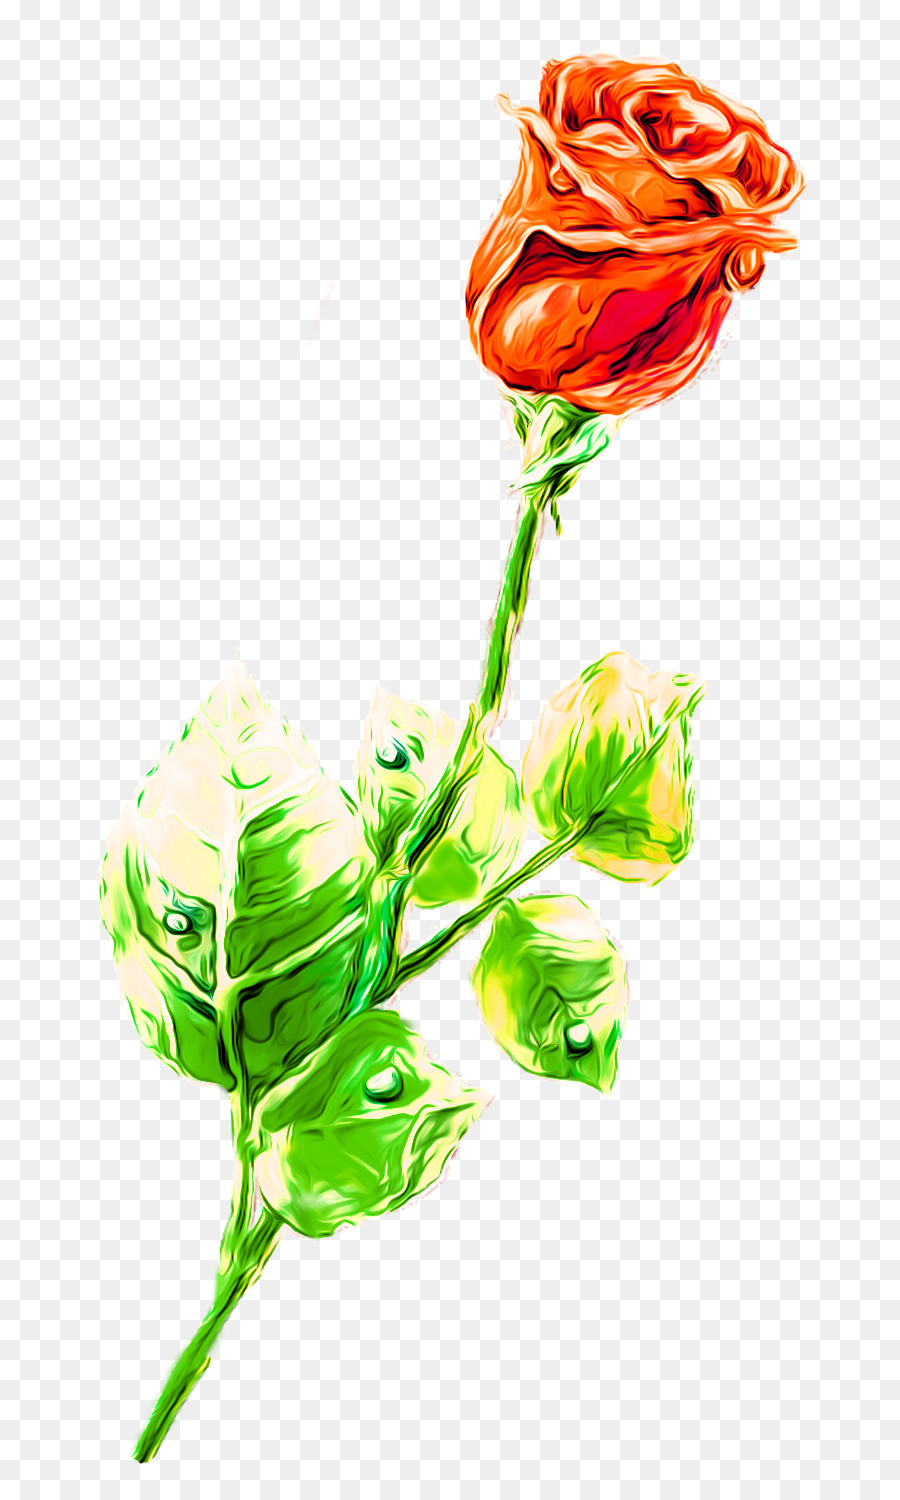 Bouquet Of Flowers Drawing Png Download 800 1500 Free Transparent Beach Rose Png Download Cleanpng Kisspng Download a free preview or high quality adobe illustrator ai, eps, pdf and high resolution jpeg versions. bouquet of flowers drawing png download